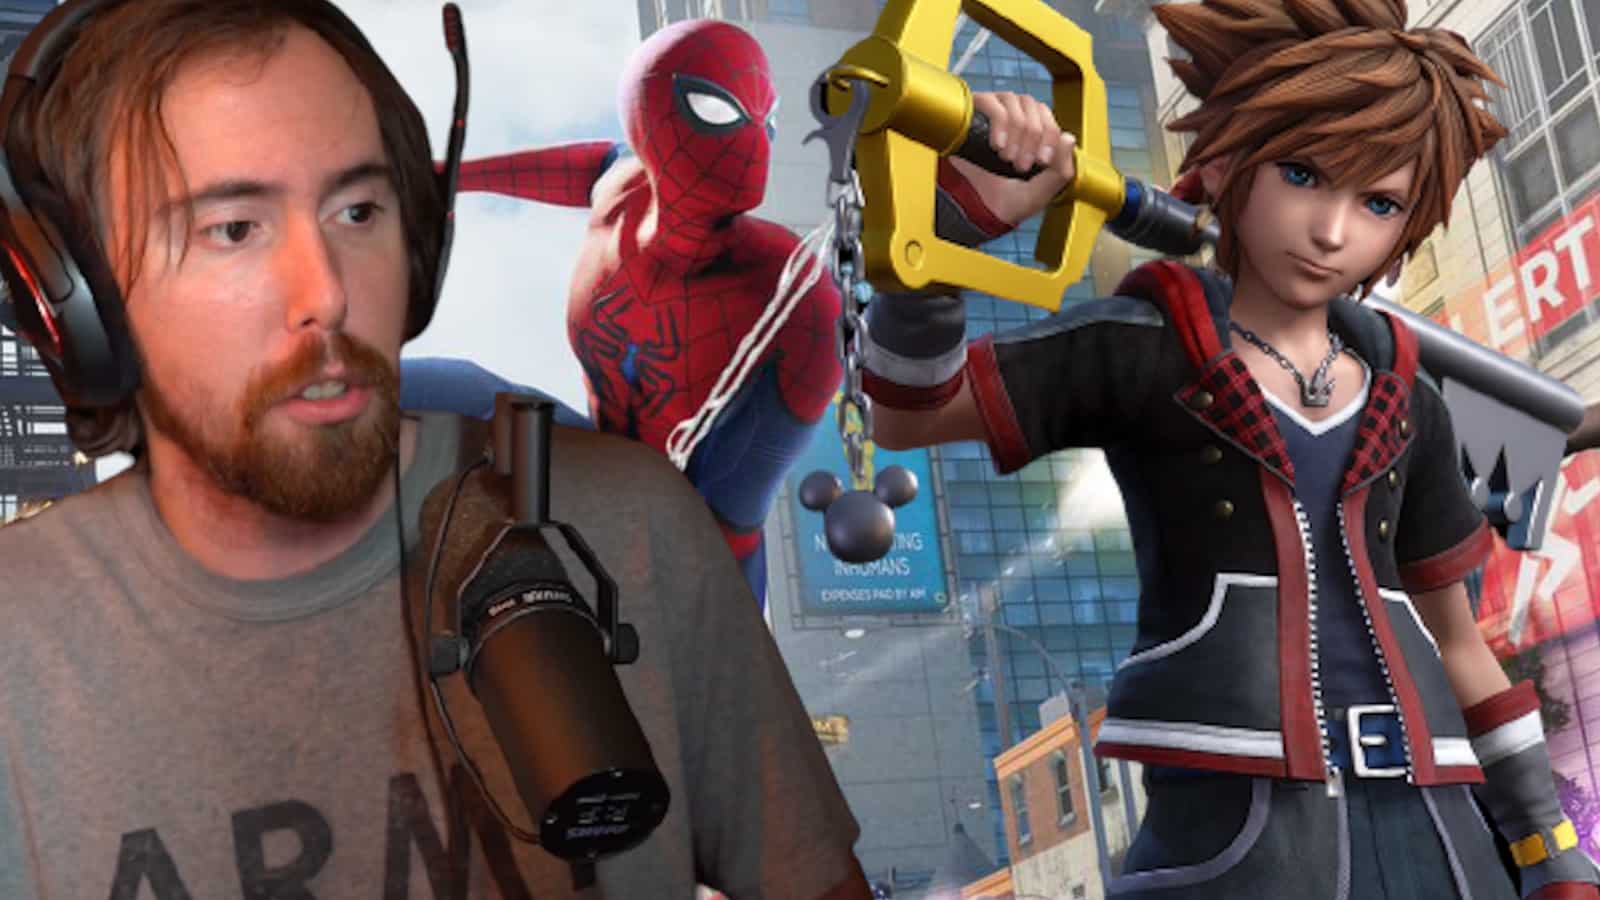 Asmongold against marvel characters in kingdom hearts